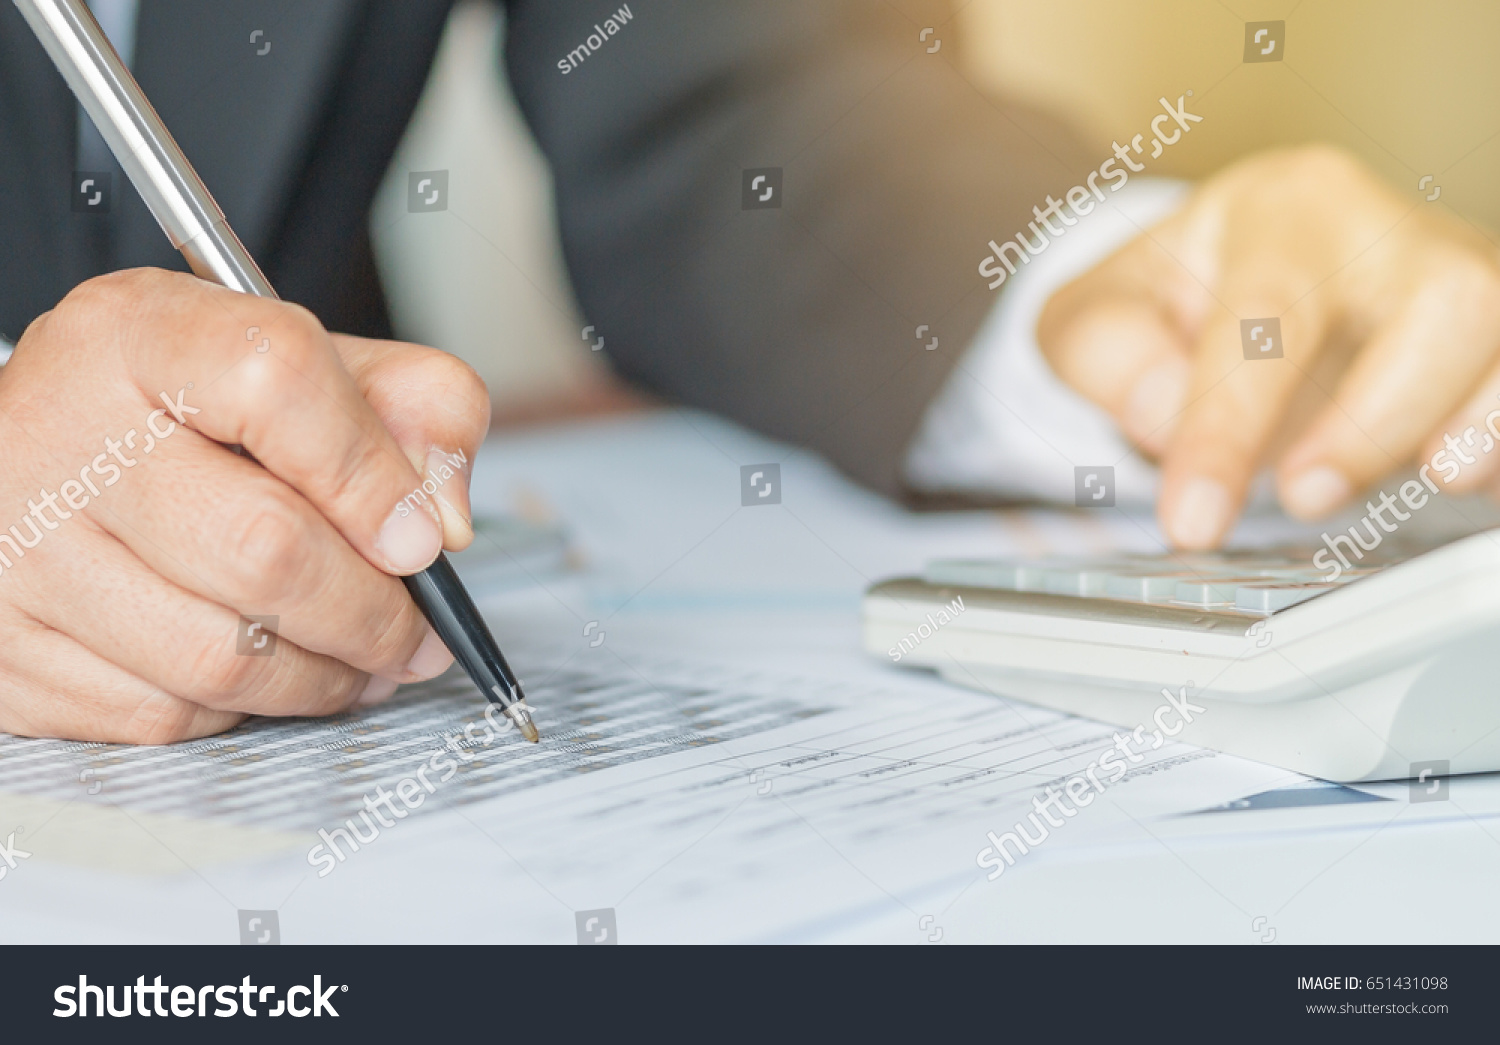 Hand calculator and holding pen for analyzing financial data and counting on document chart, business concept. #651431098